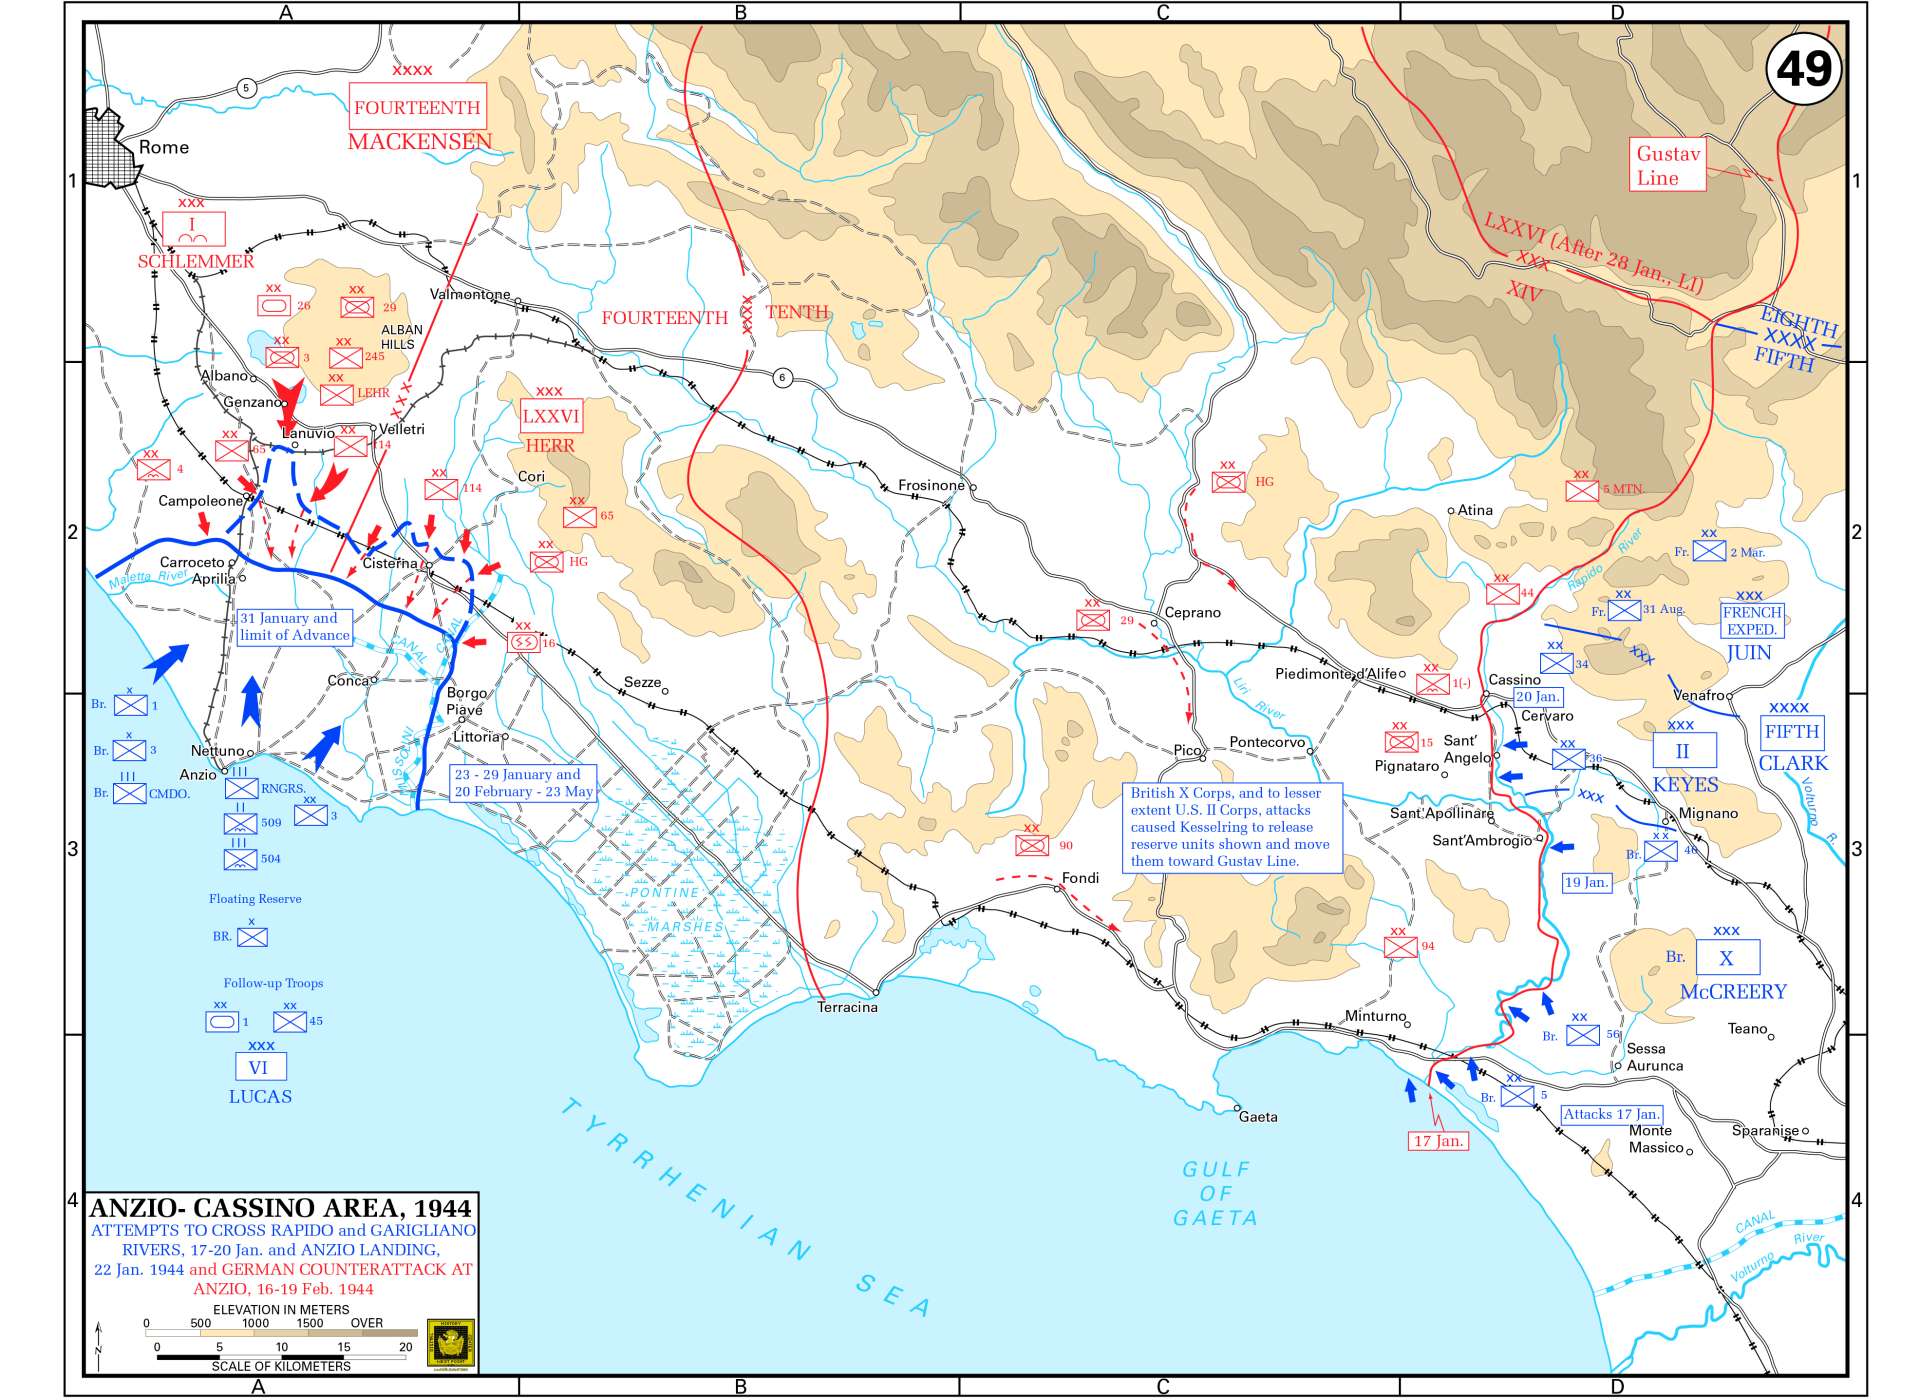 Map of Allied operations in the Anzio-Cassino area in Italy, 1944. Map courtesy of the United States Military Academy Department of History.